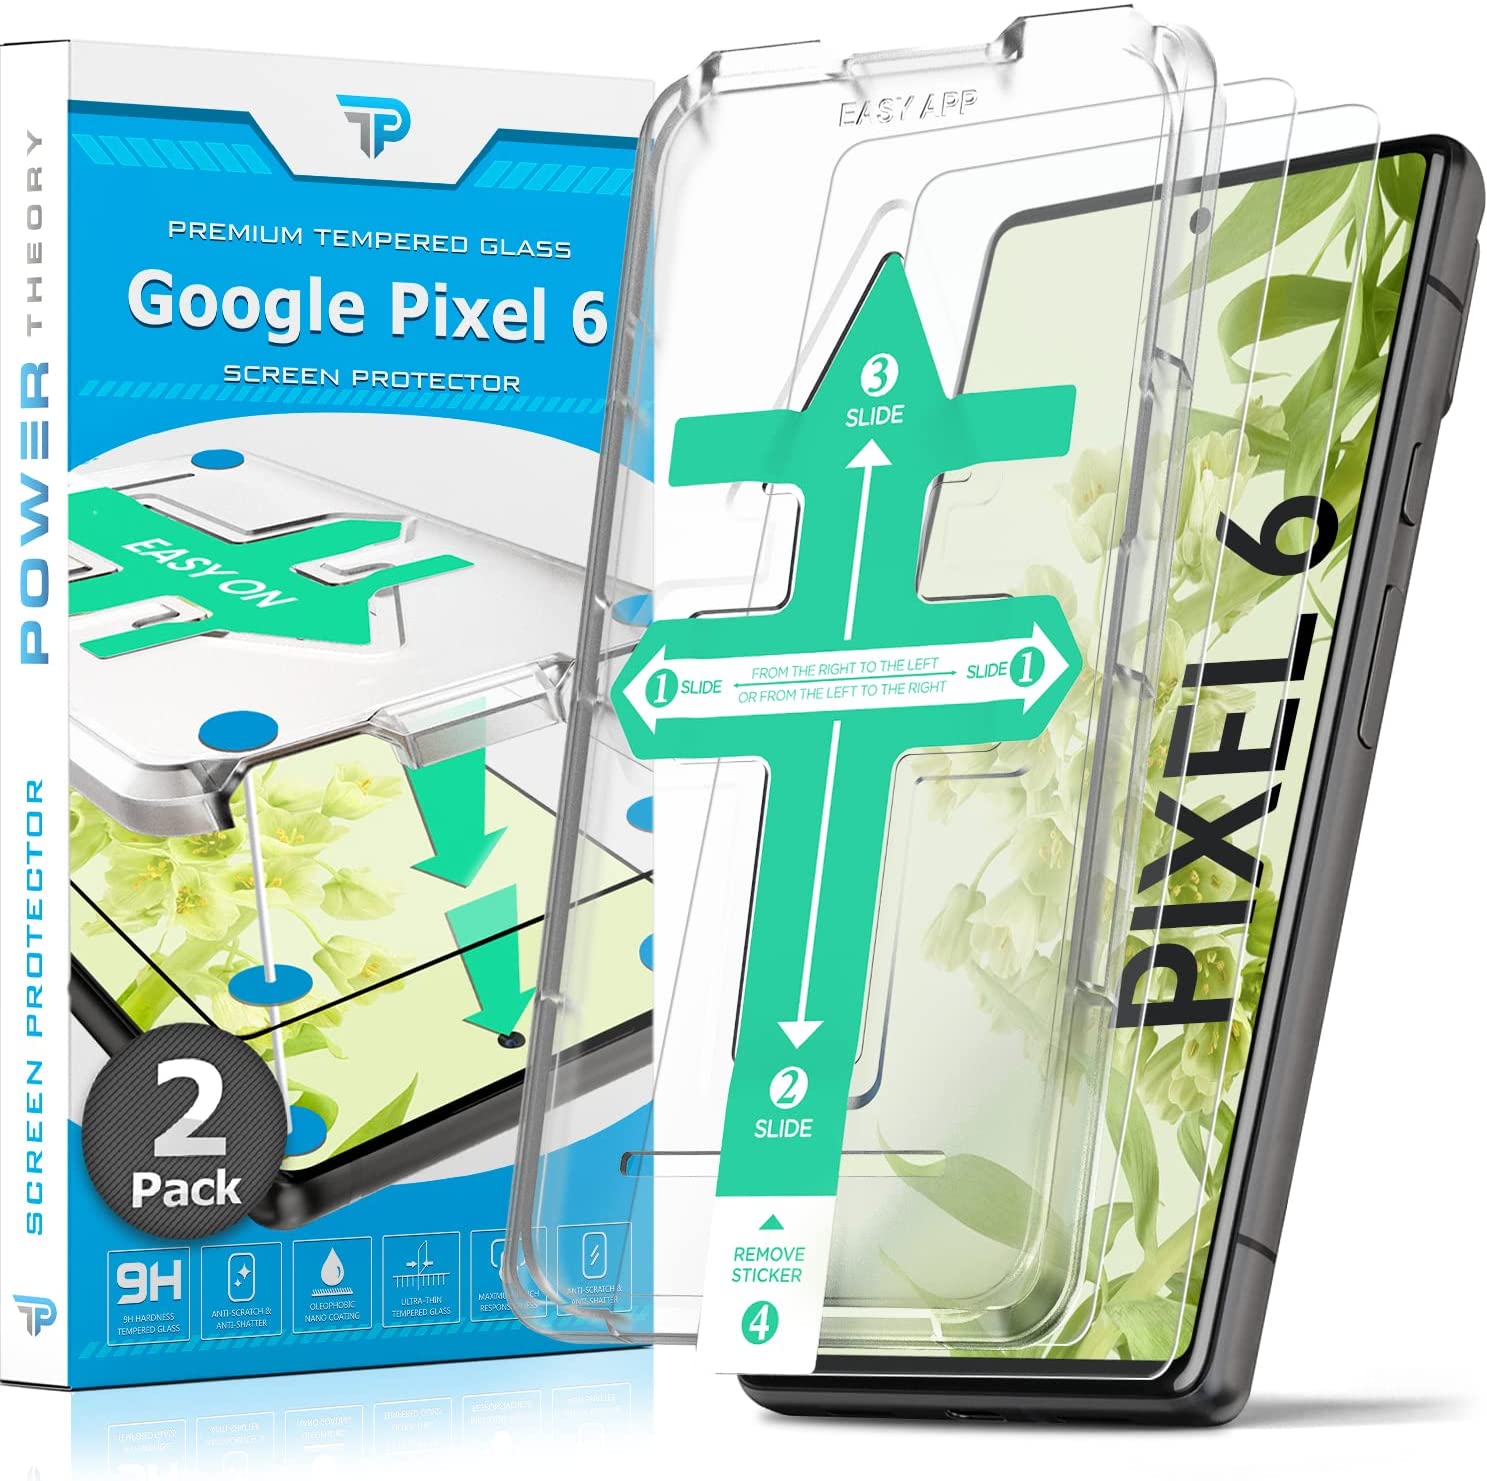 Google Pixel 6 Tempered Glass Screen Protector [2-Pack]